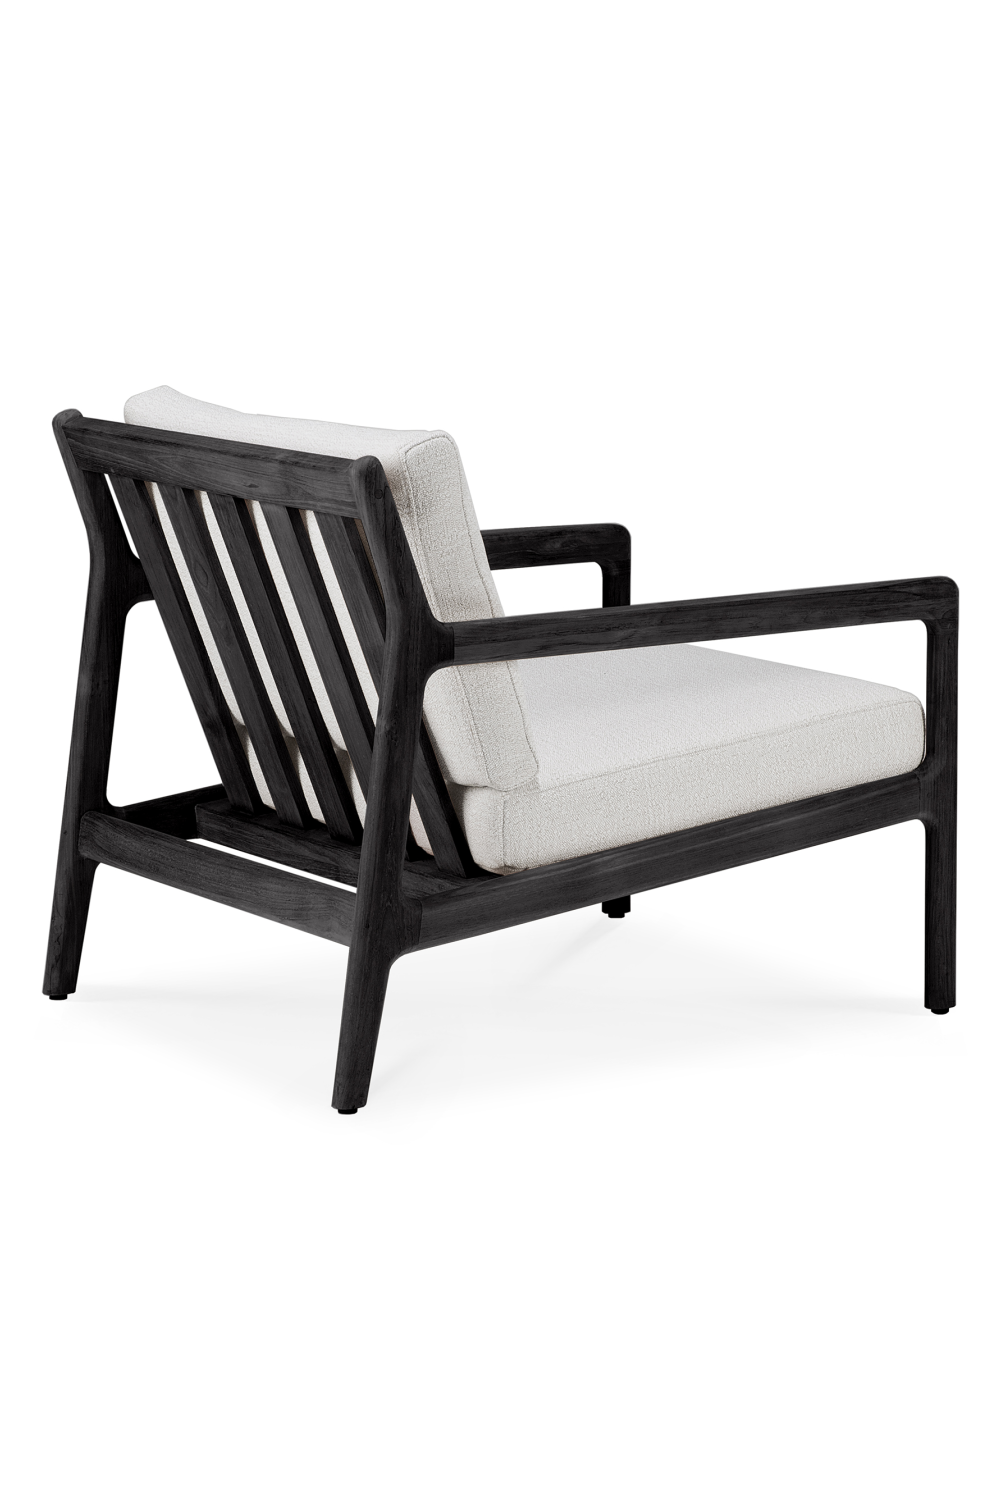 Outdoor Cushioned Lounge Chair | Ethnicraft Jack | Woodfurniture.com